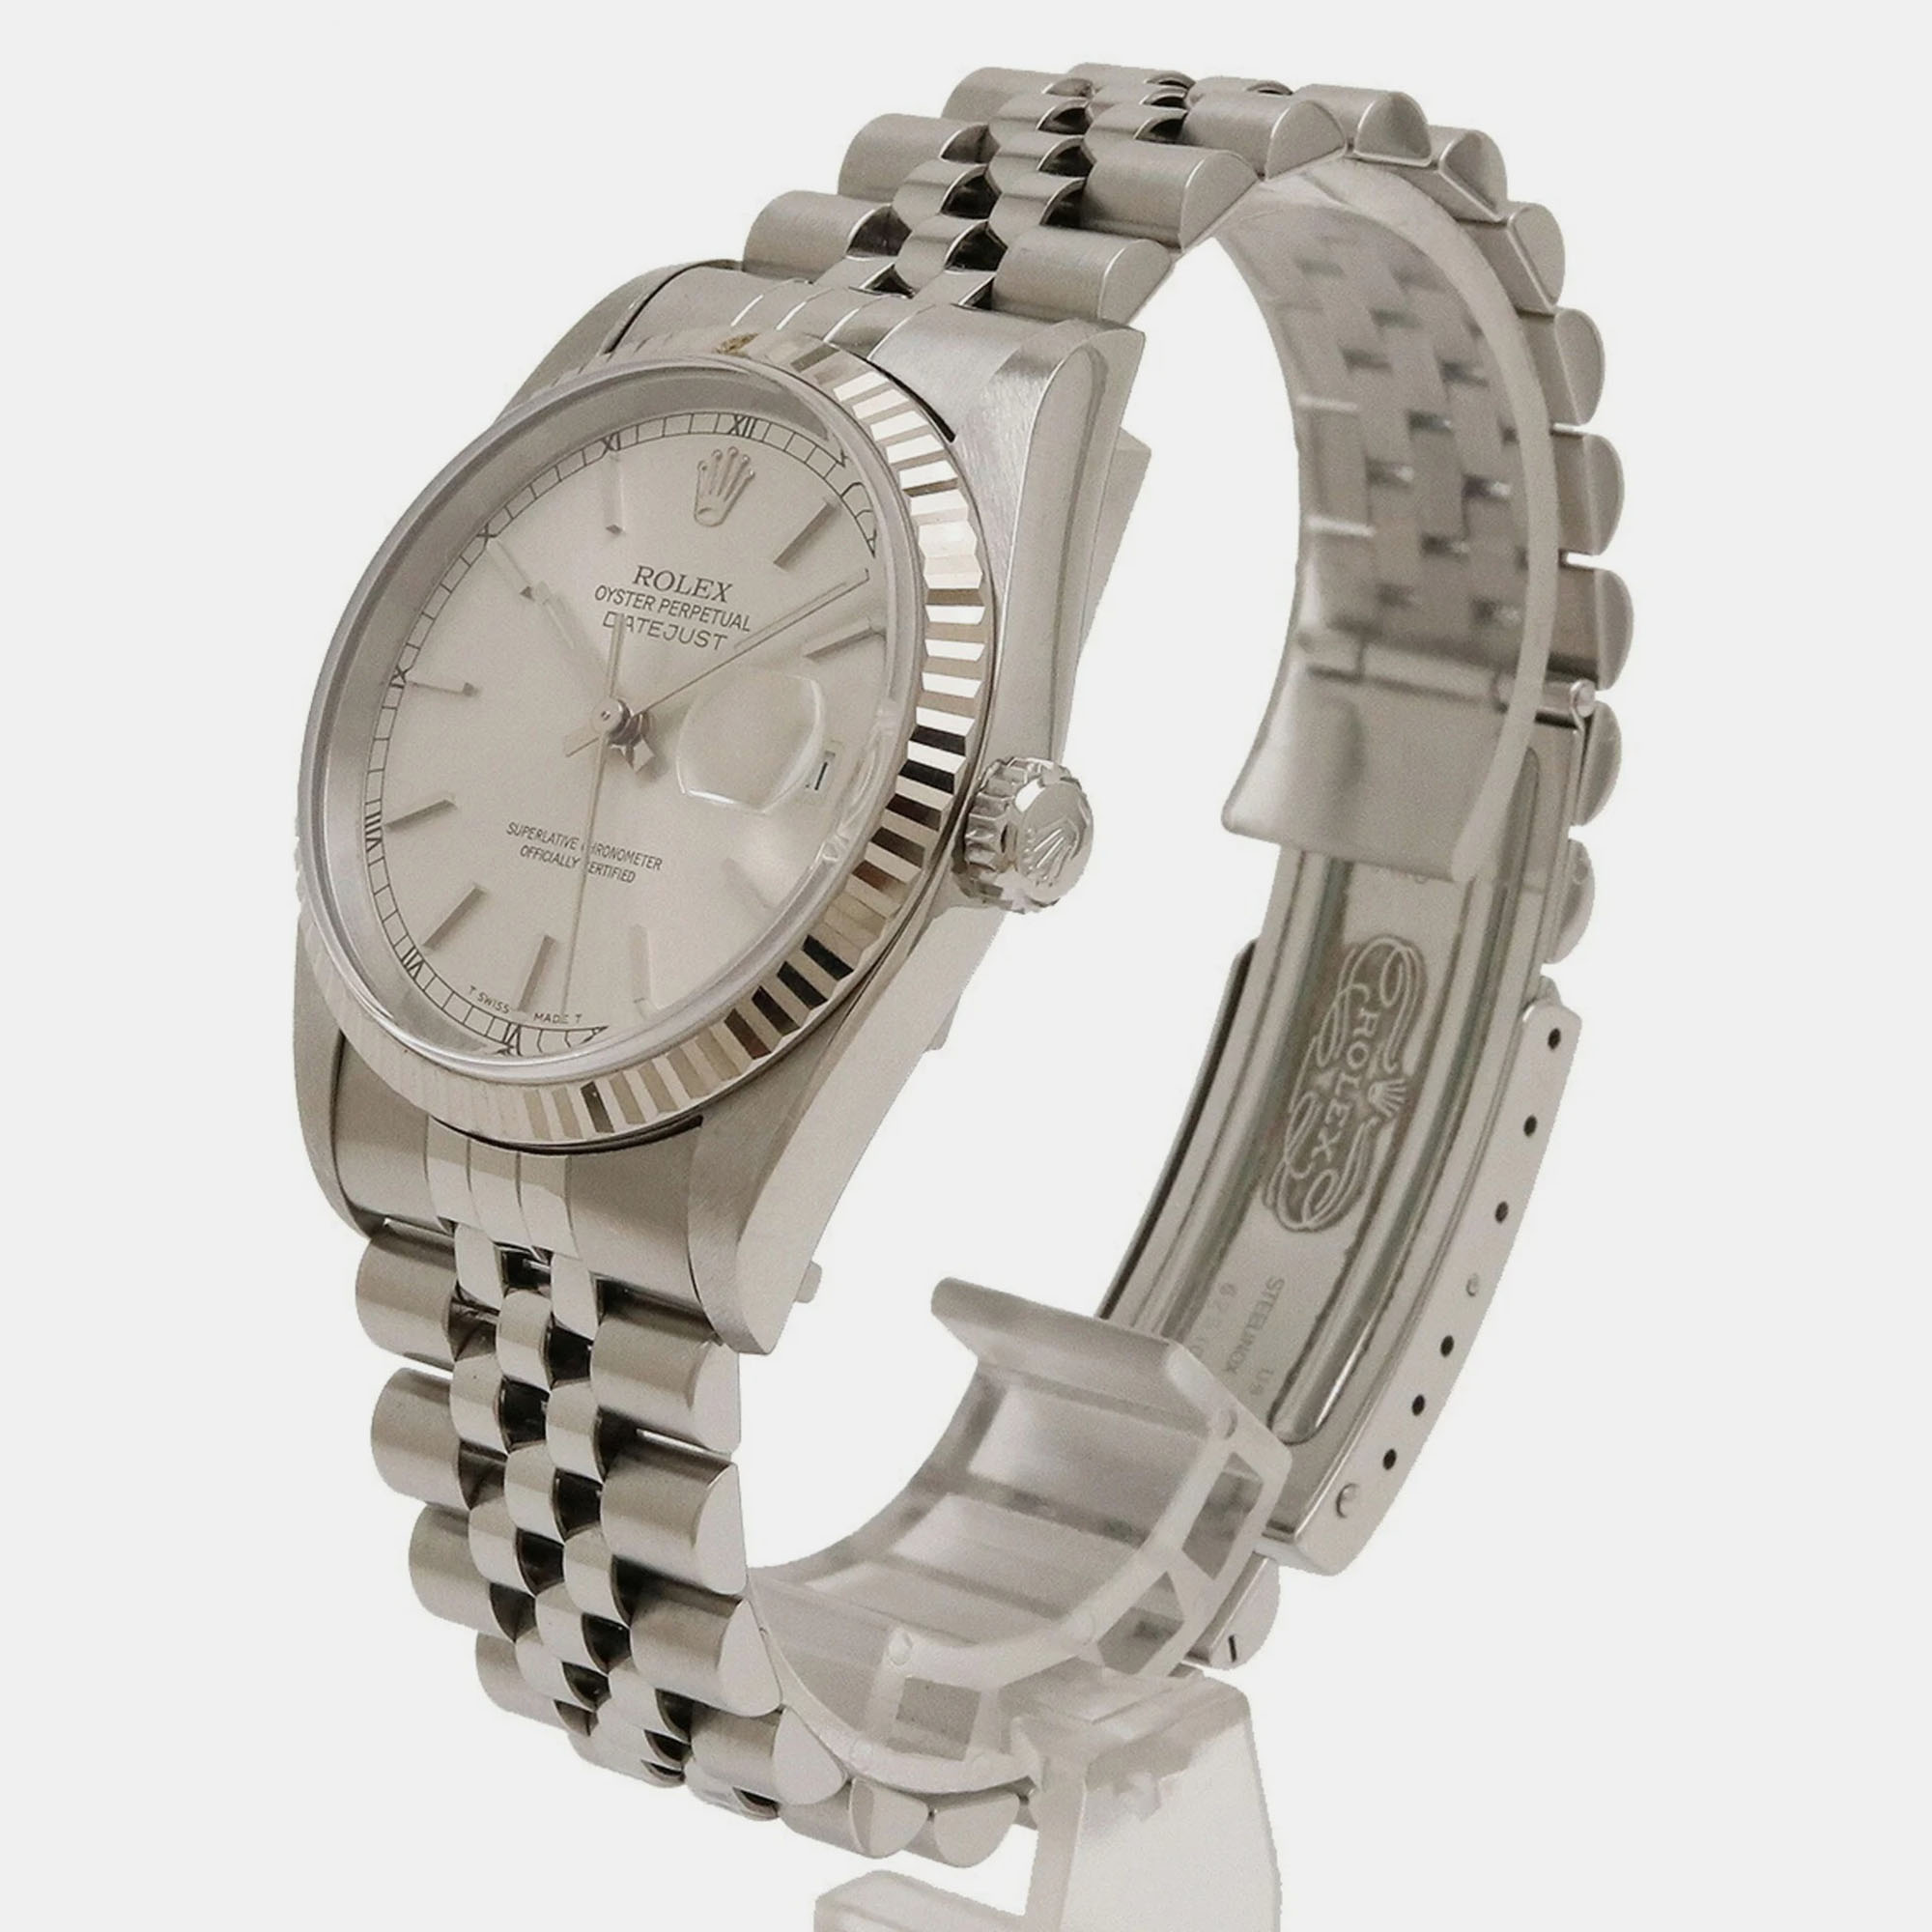 Rolex Silver 18k White Gold And Stainless Steel Datejust 16234 Automatic Men's Wristwatch 35 Mm